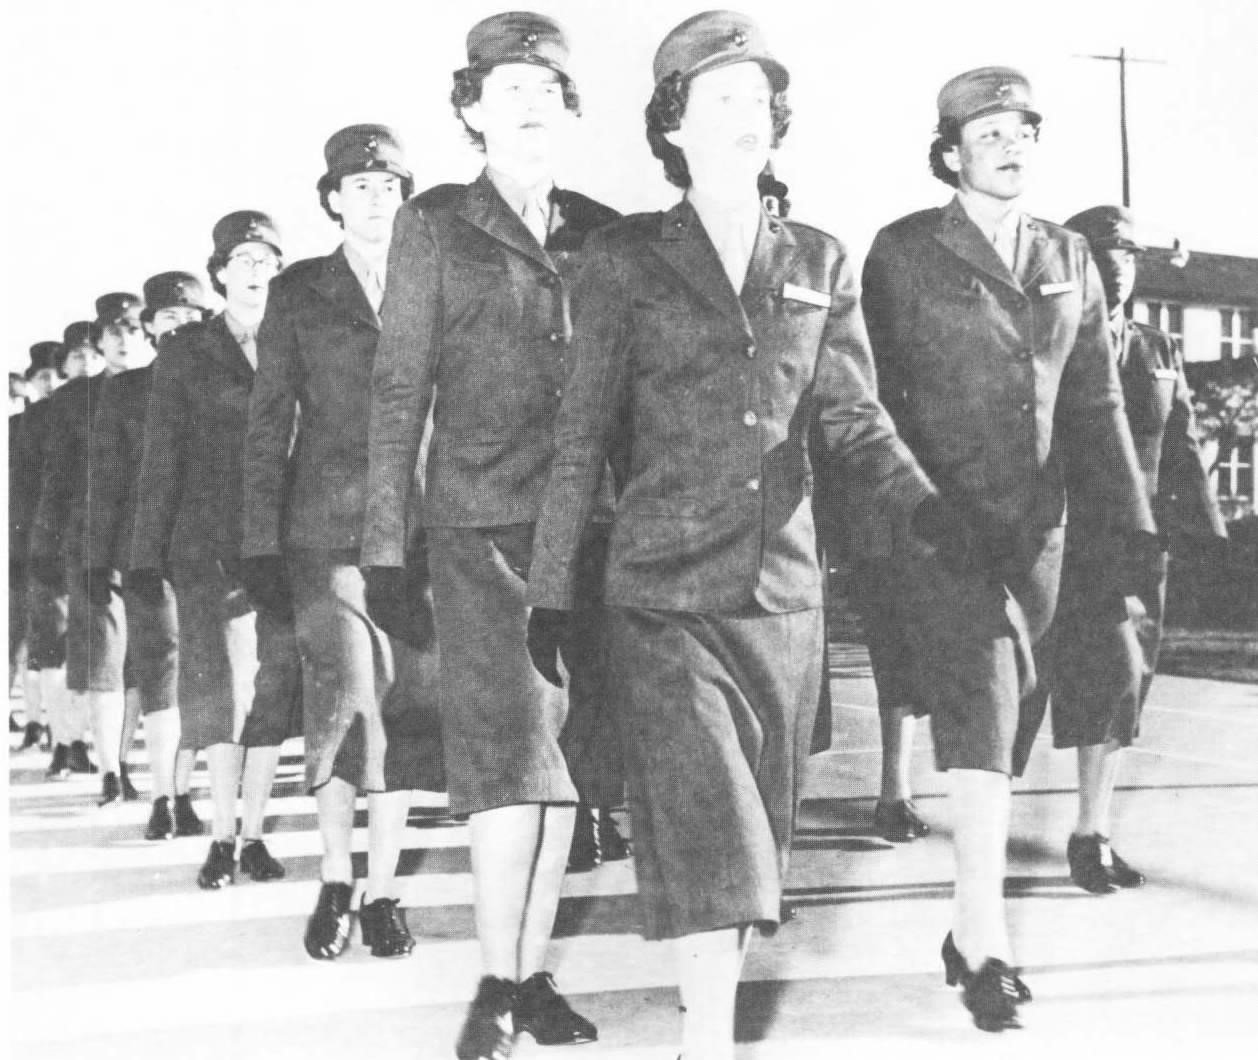 Private Annie L. Grimes, the third black woman to enlist in the Marine Corps, with her recruit platoon at Parris Island, South Carolina, 1950. Grimes went on to become the first black woman officer in the Corps.